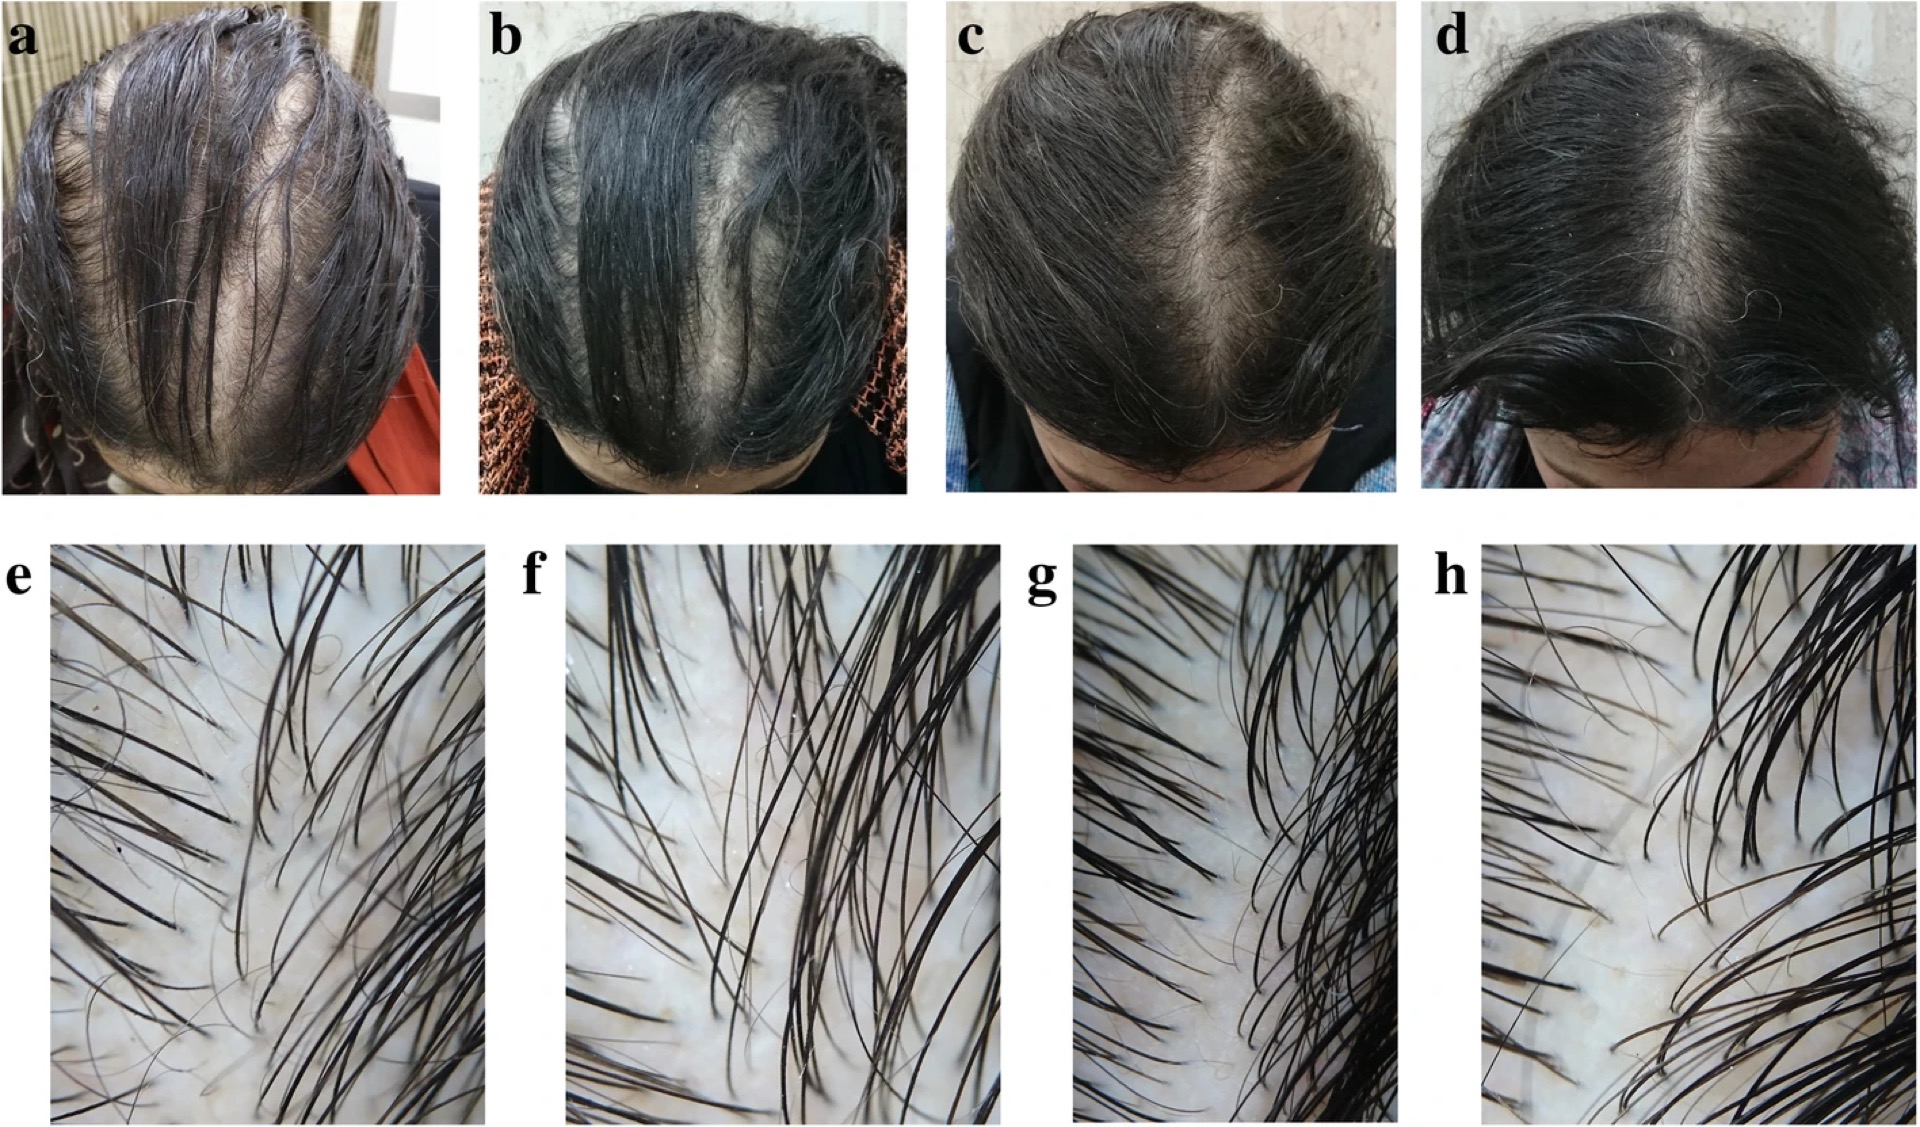 Before and after photos of patient using 2% Minoxidil